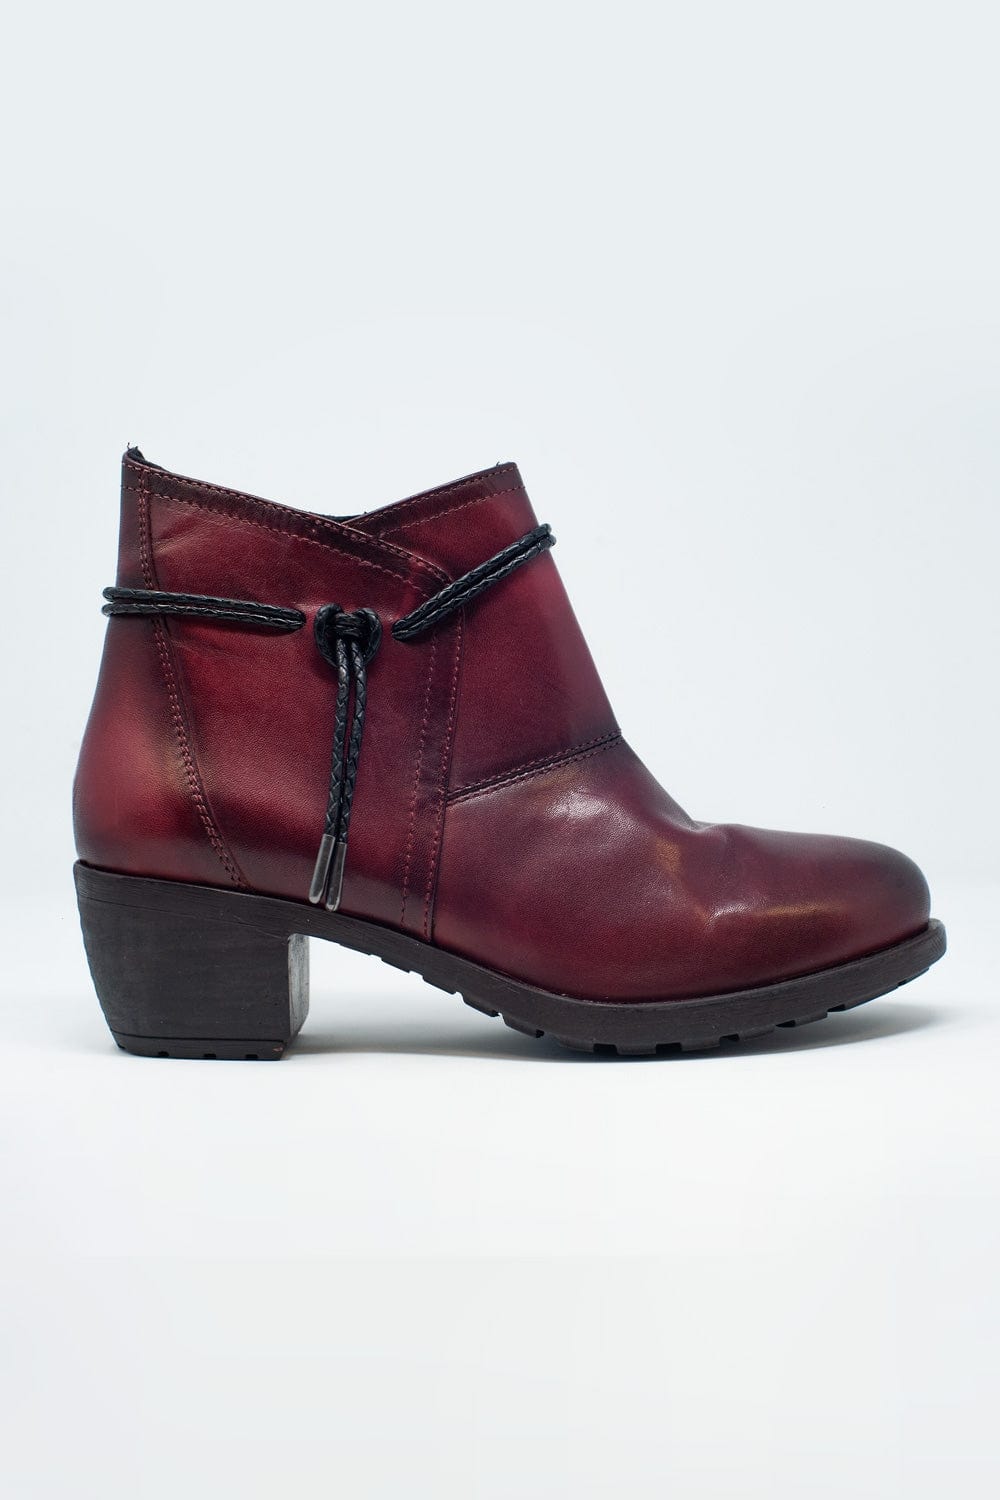 Q2 Women's Boots Maroon Blocked Mid Heeled Ankle Boots with Round Toe